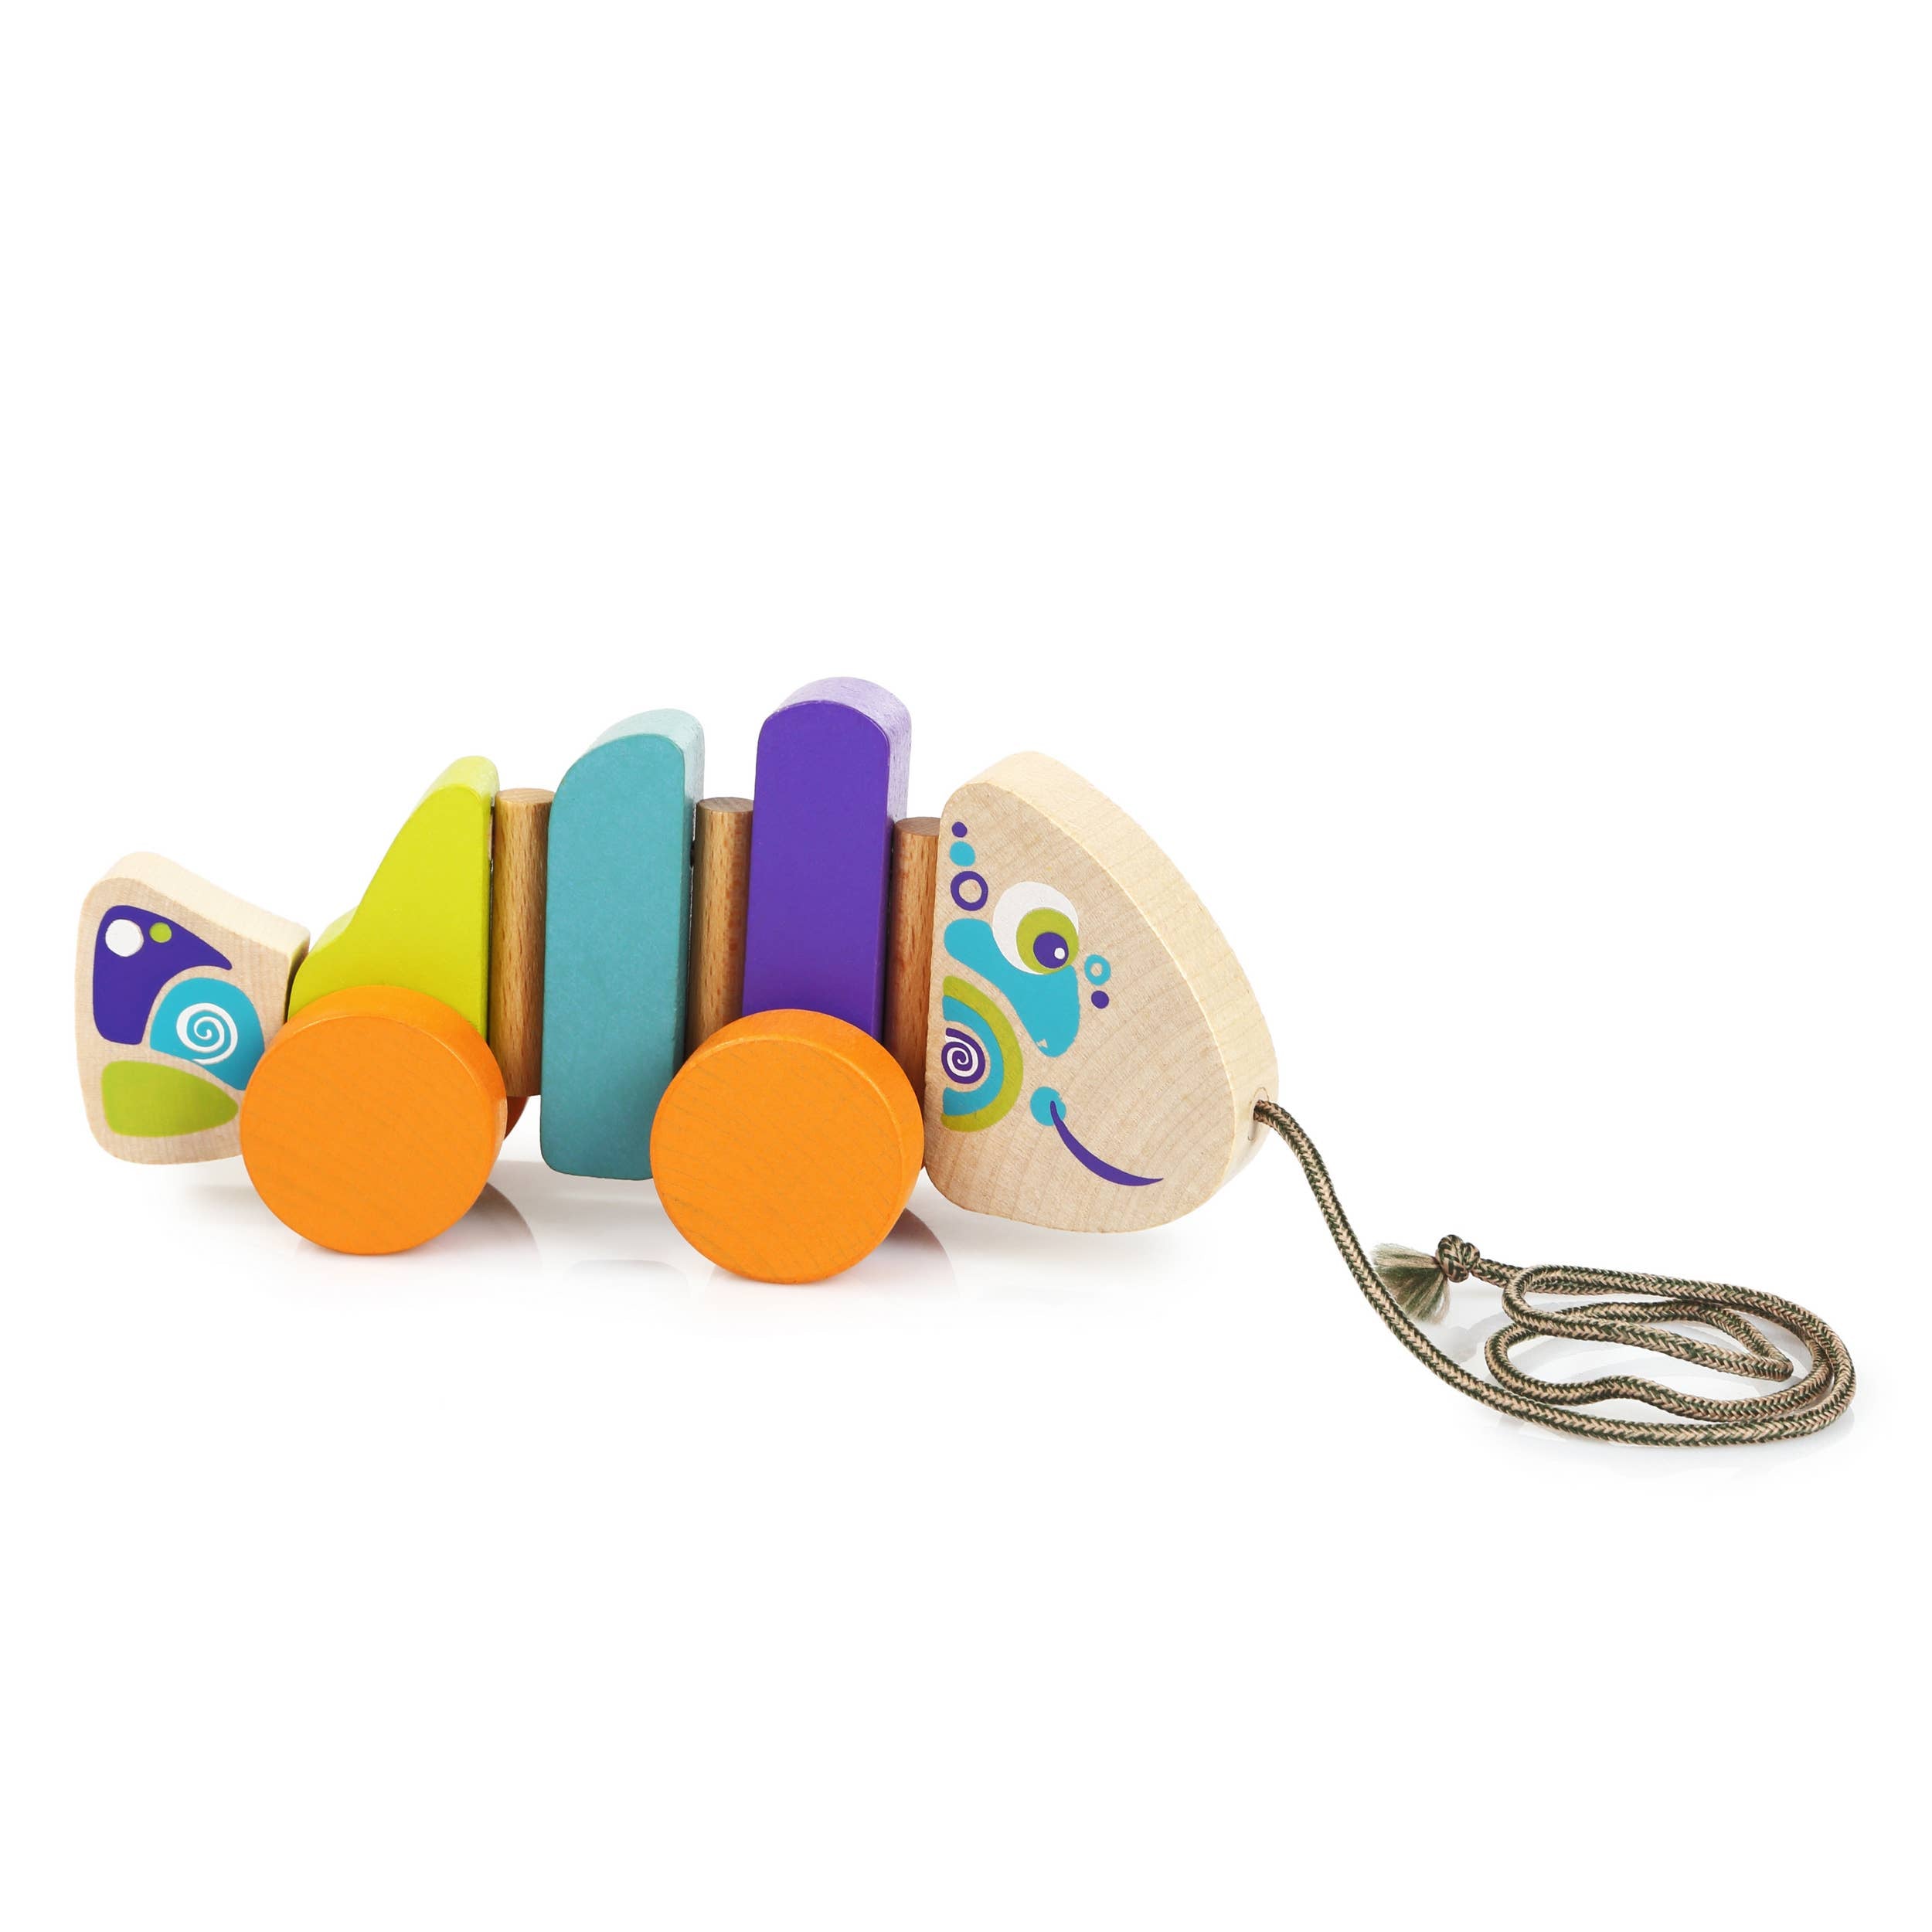 Wise Elk/Cubika Wooden Push&Pull Toy - Walk-A-Long Fish